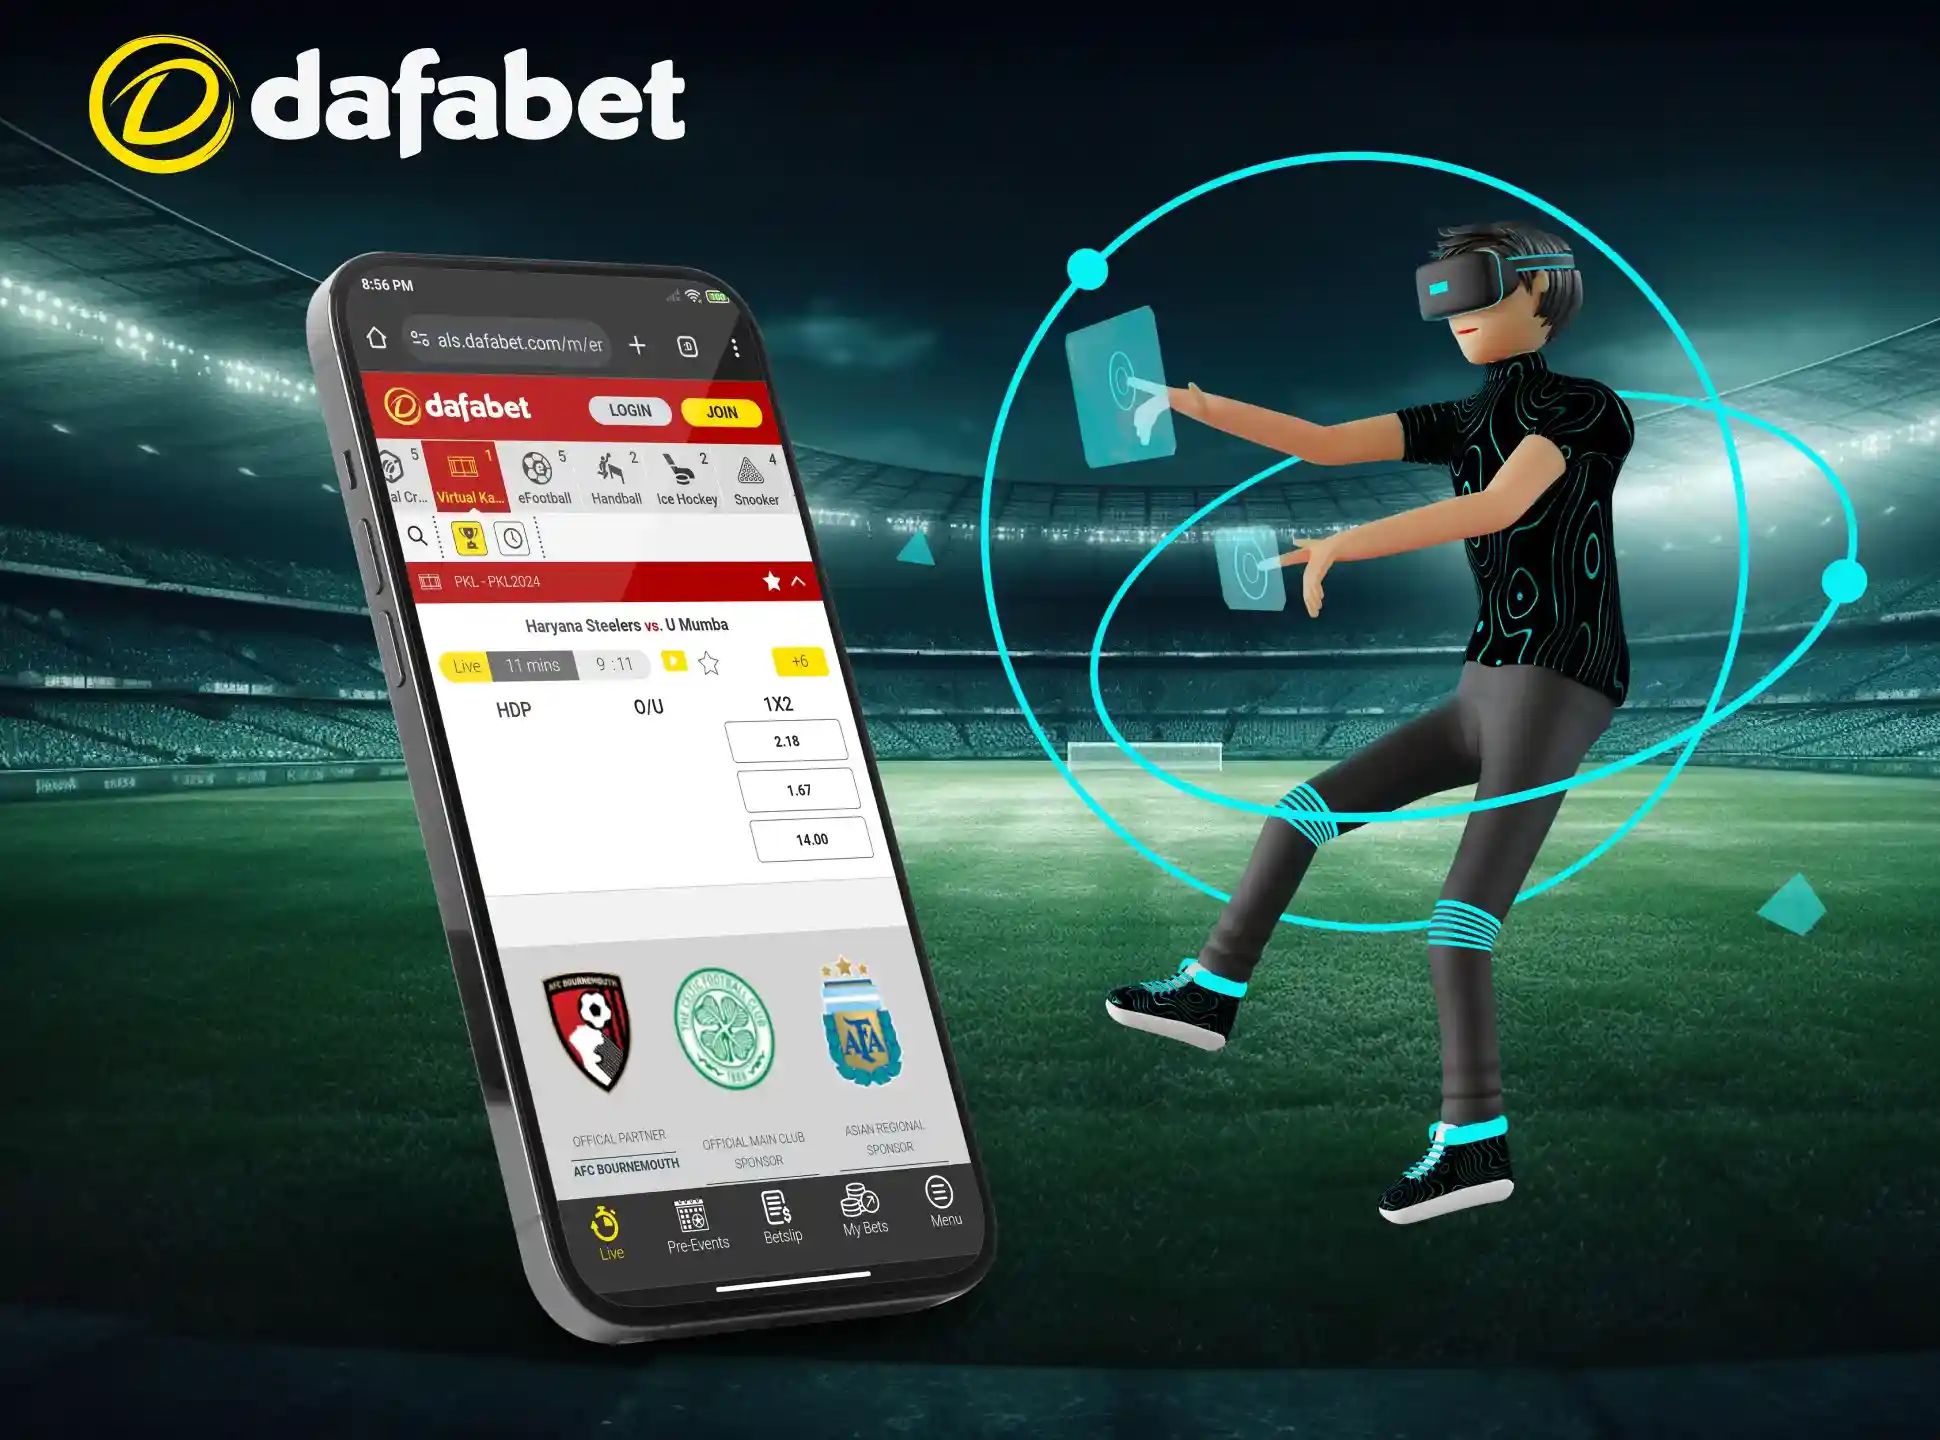 Dafabet is the leader in virtual sports betting.